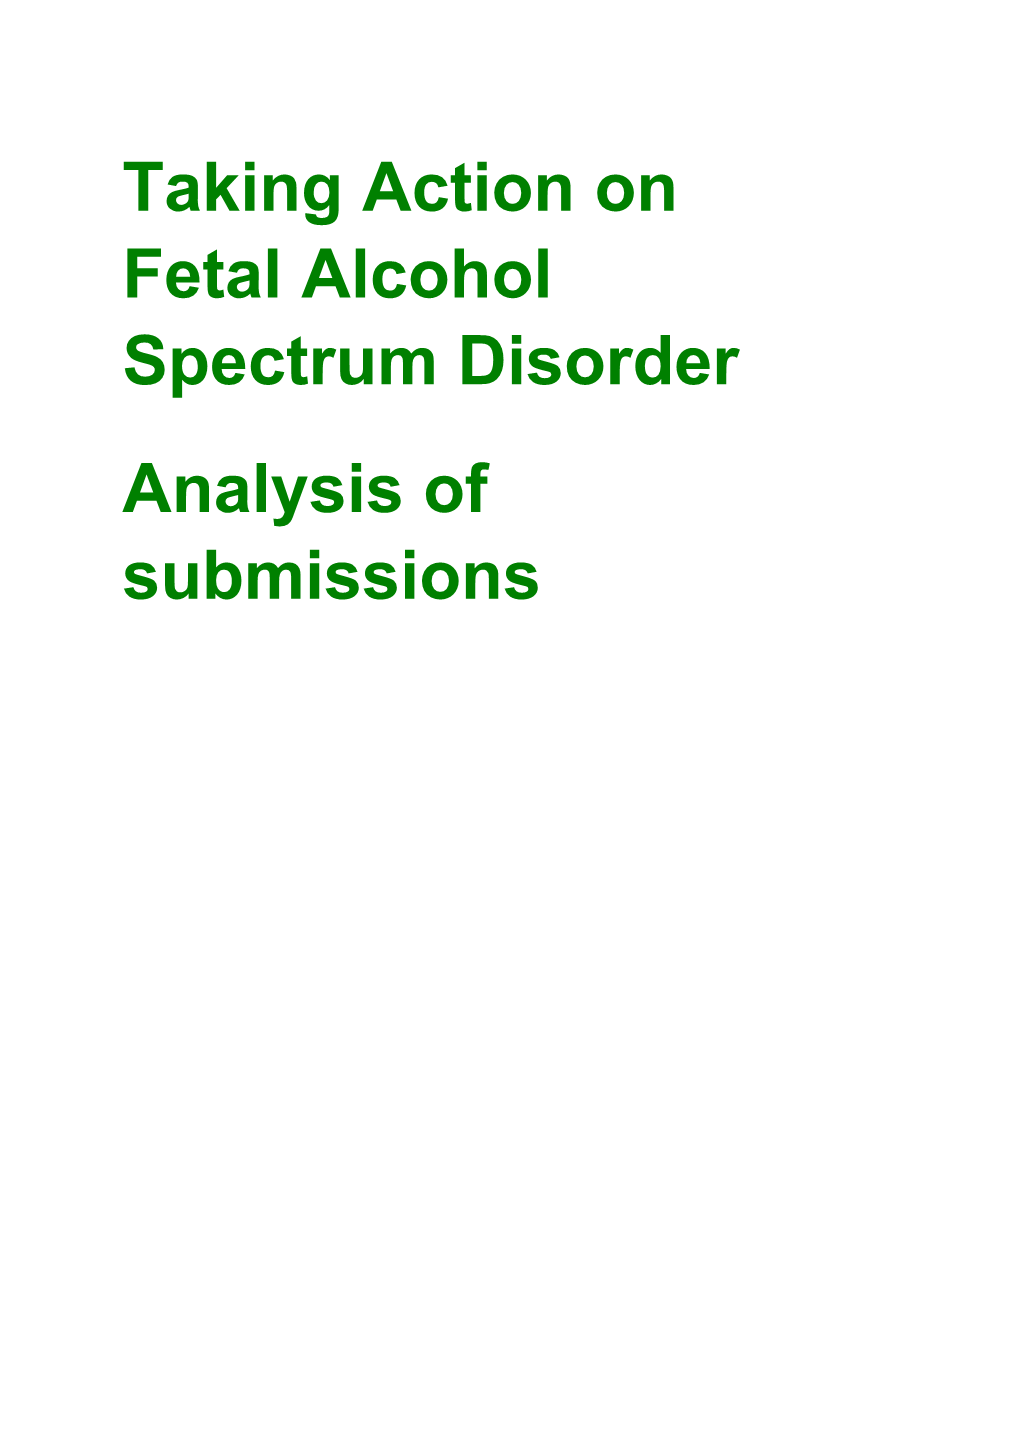 Taking Action on Fetal Alcohol Spectrum Disorder Analysis of Submissions